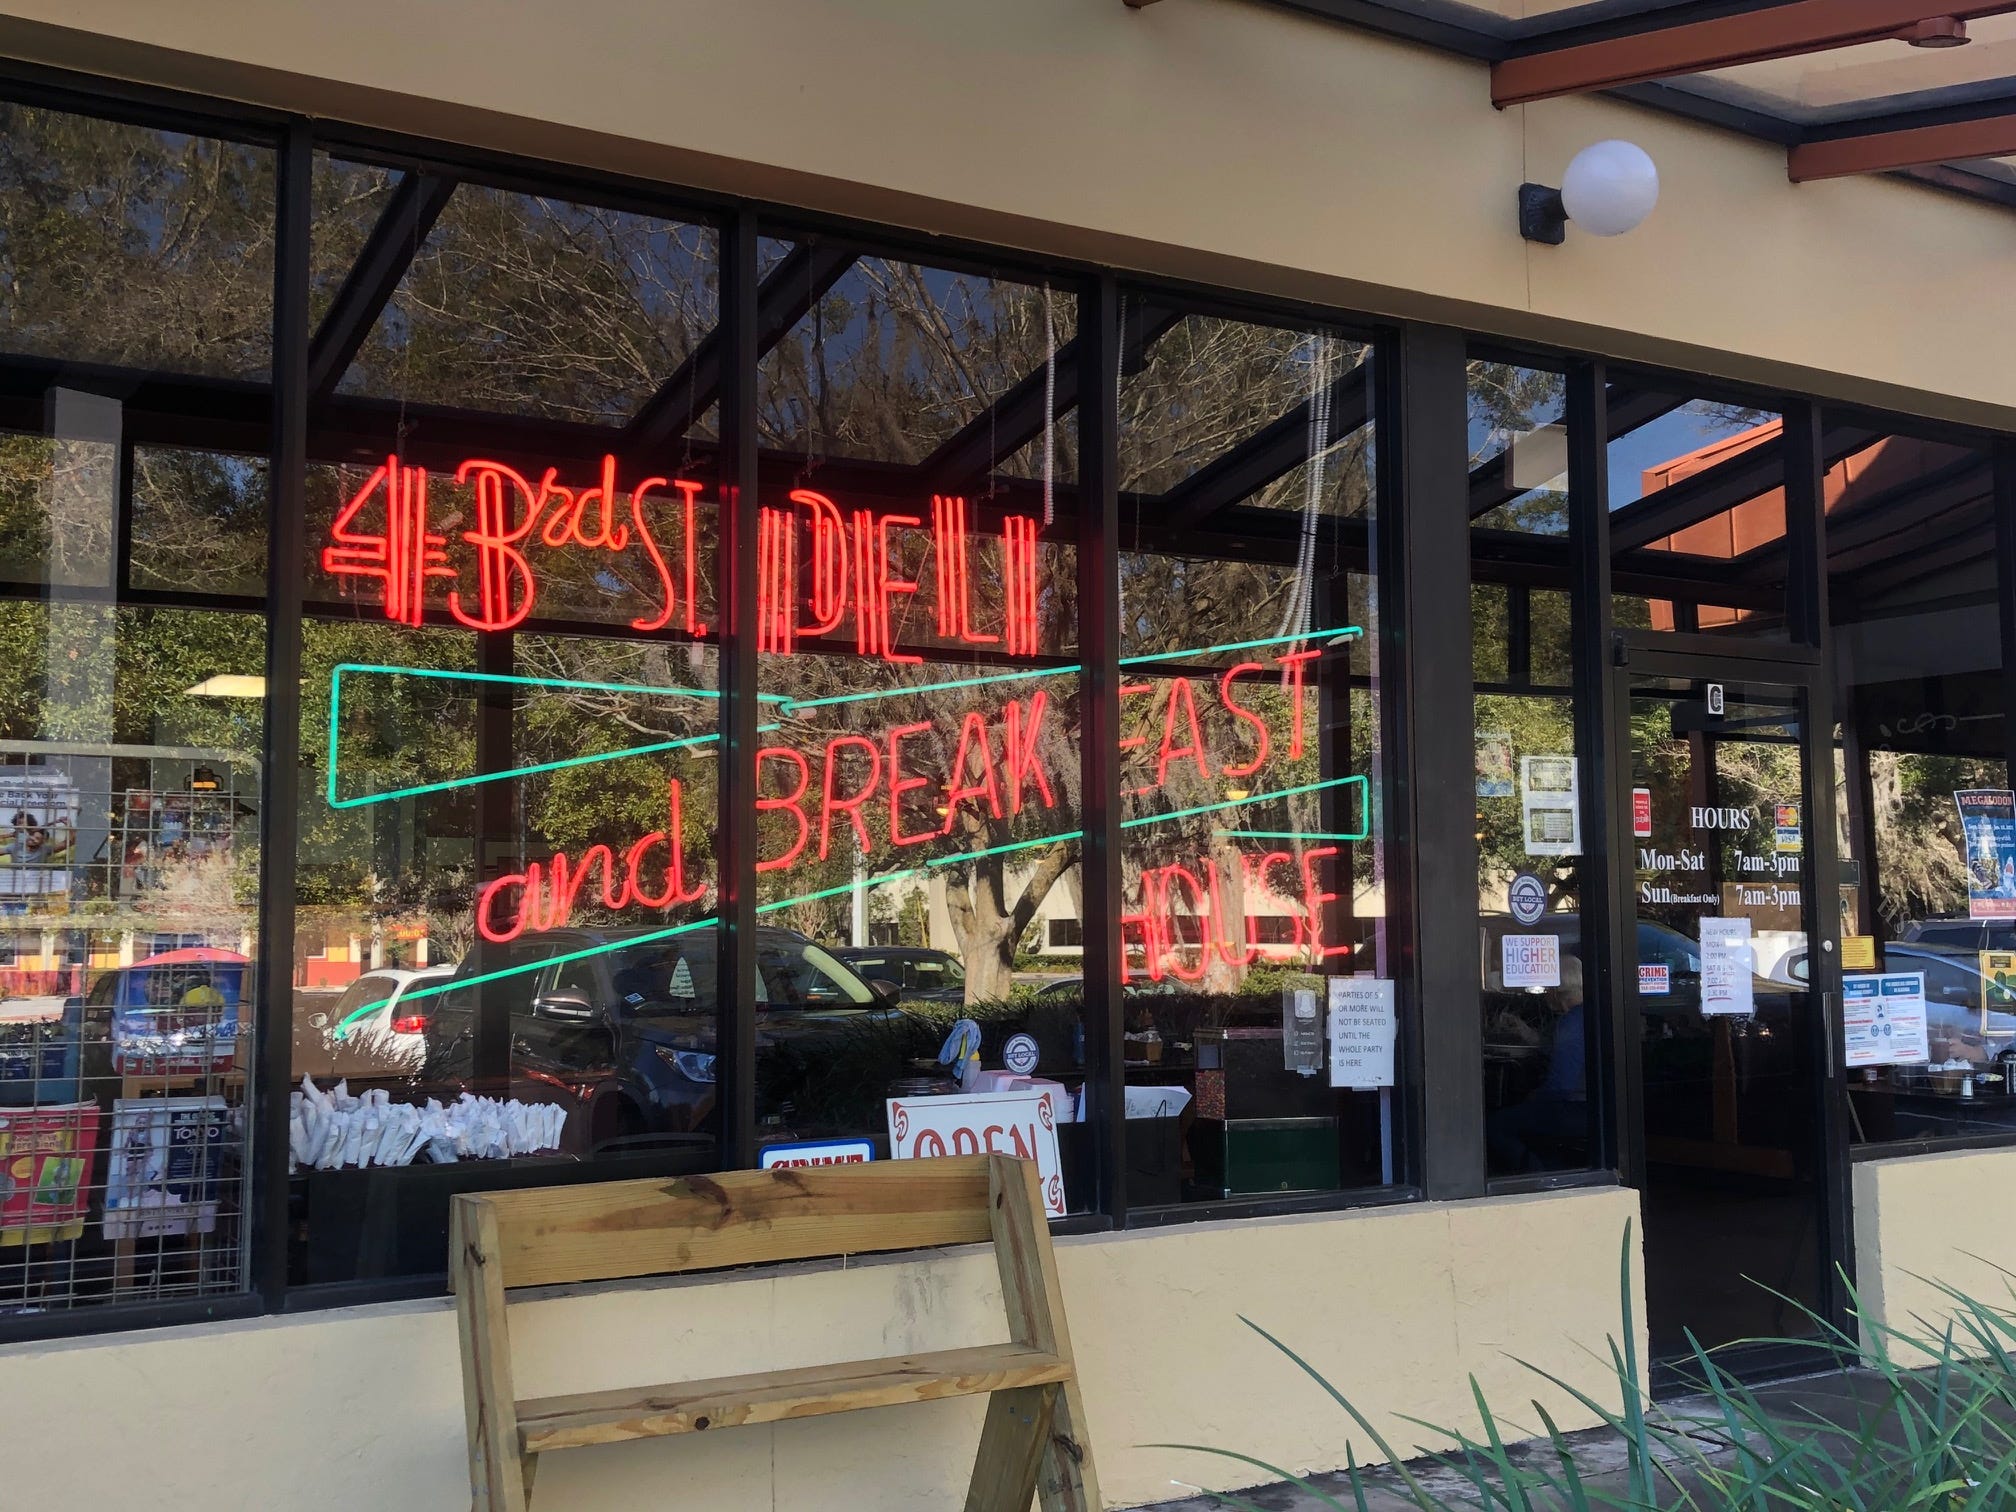 Exterior view of front window at 43rd st deli and breakfast house in Gainesville Florida